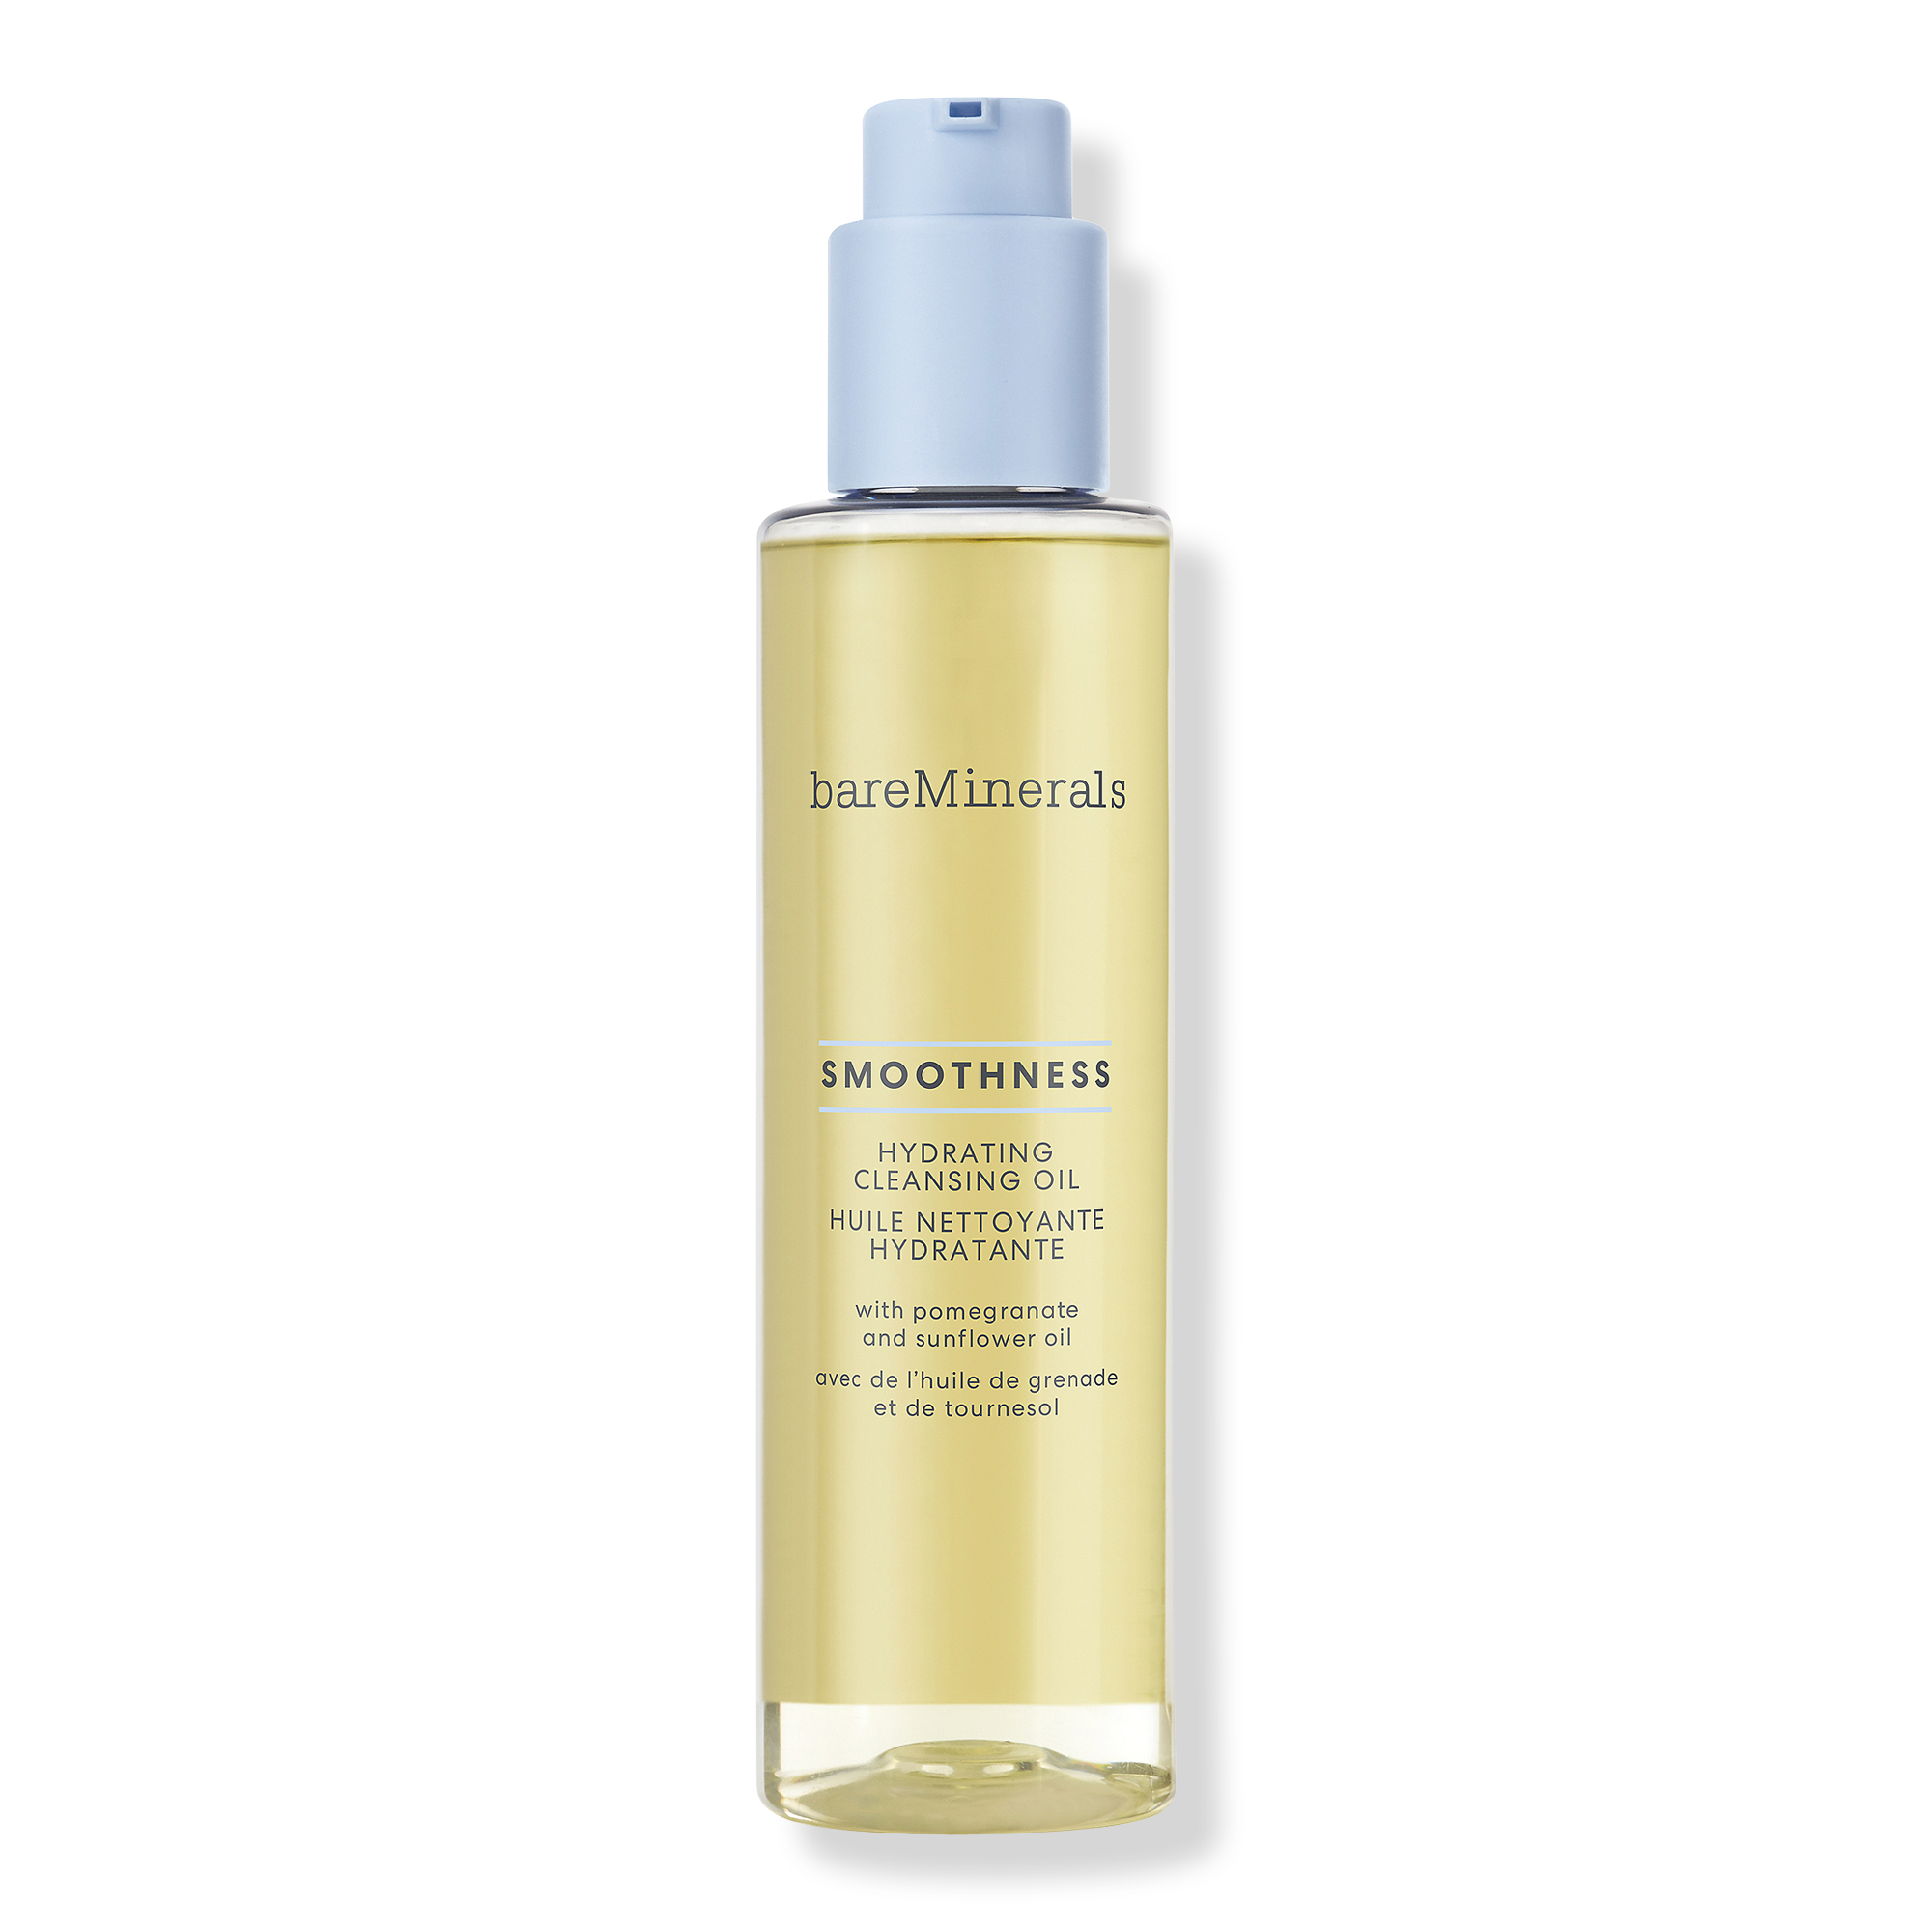 bareMinerals Smoothness Hydrating Cleansing Oil / 6OZ